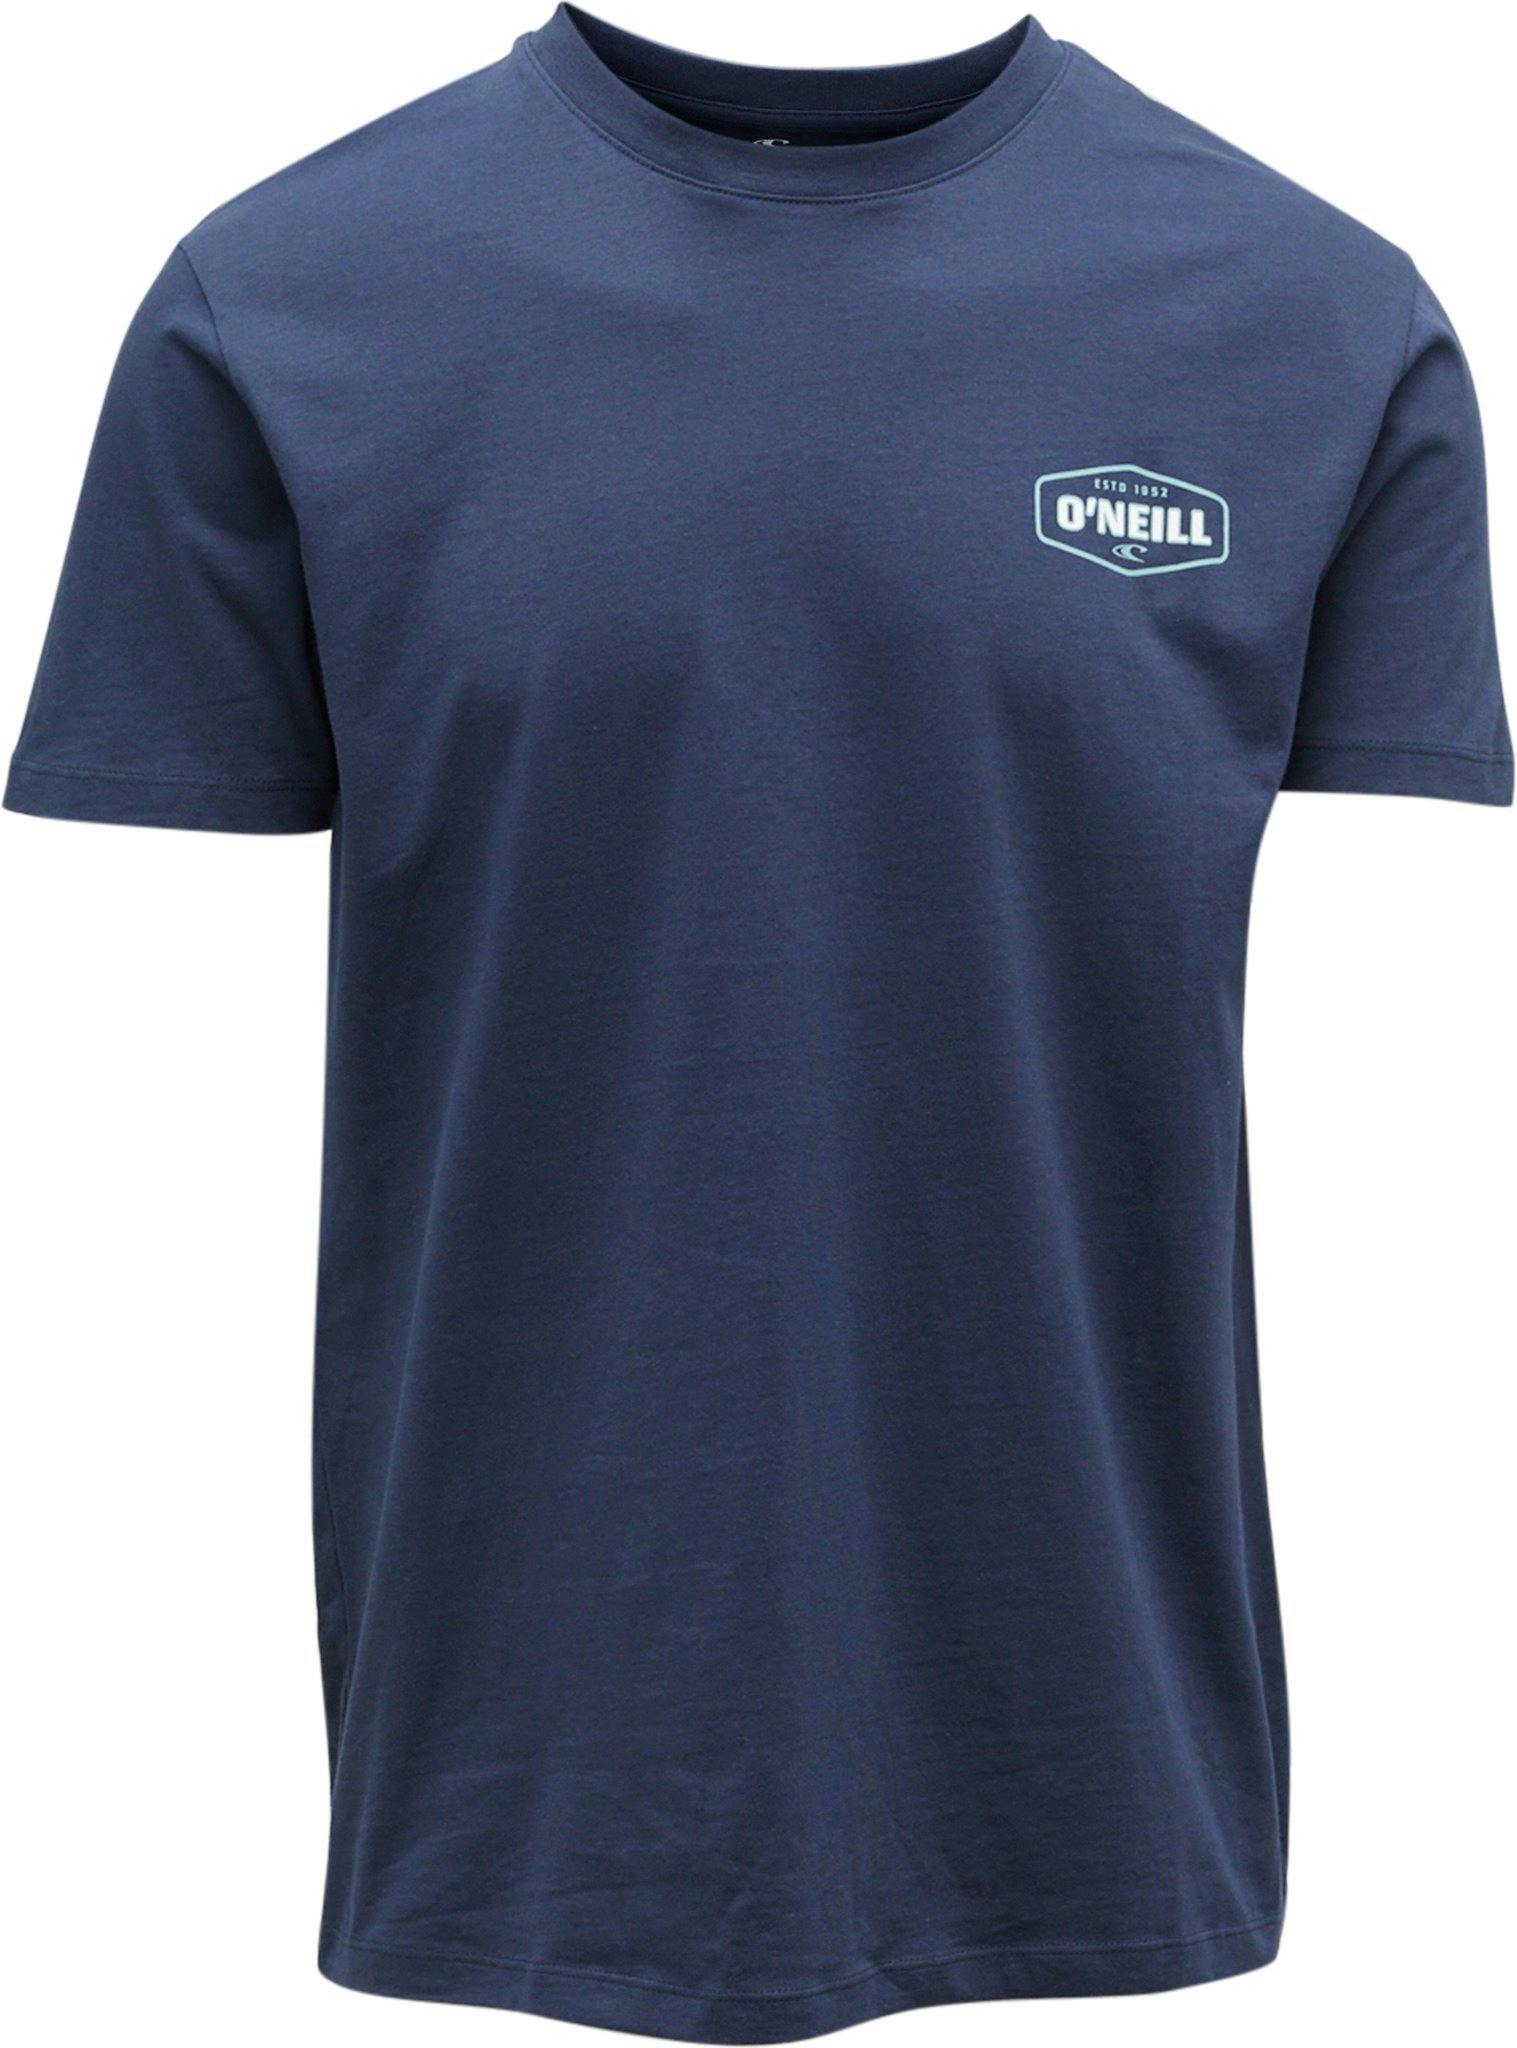 Product image for Spare Parts 2 Tee - Men's